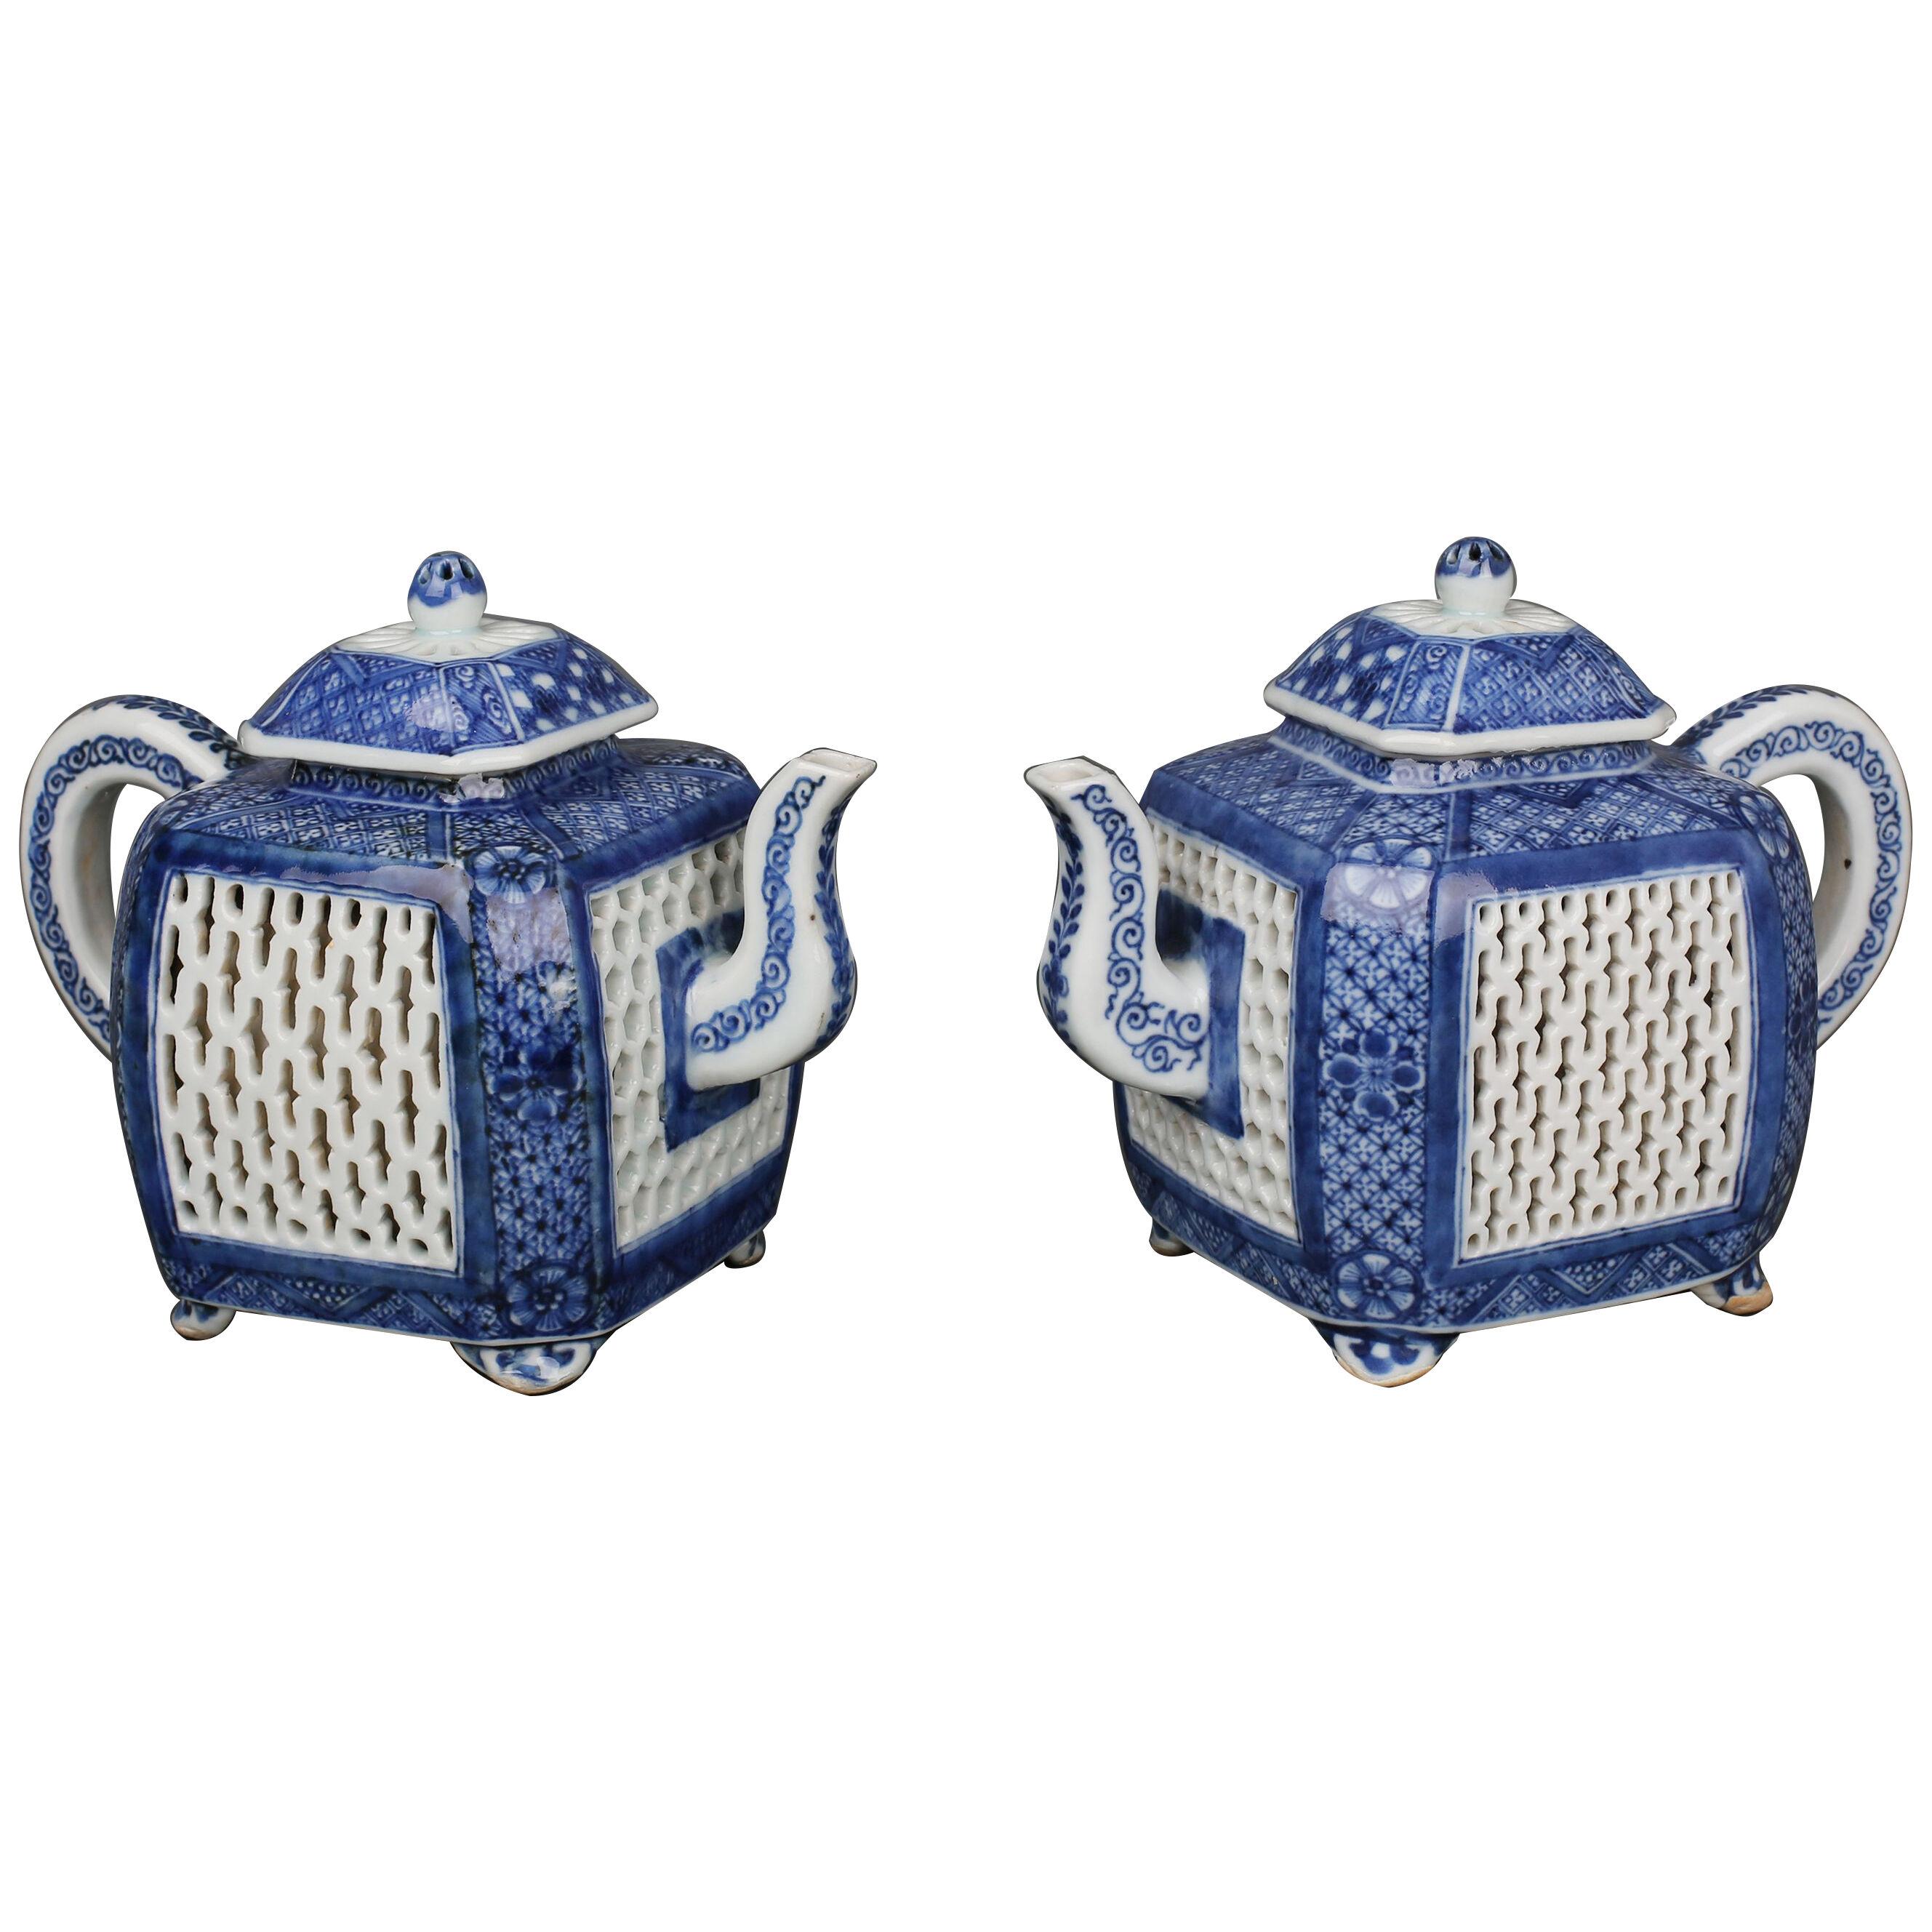 A pair of Chinese porcelain blue and white reticulated square teapots and covers